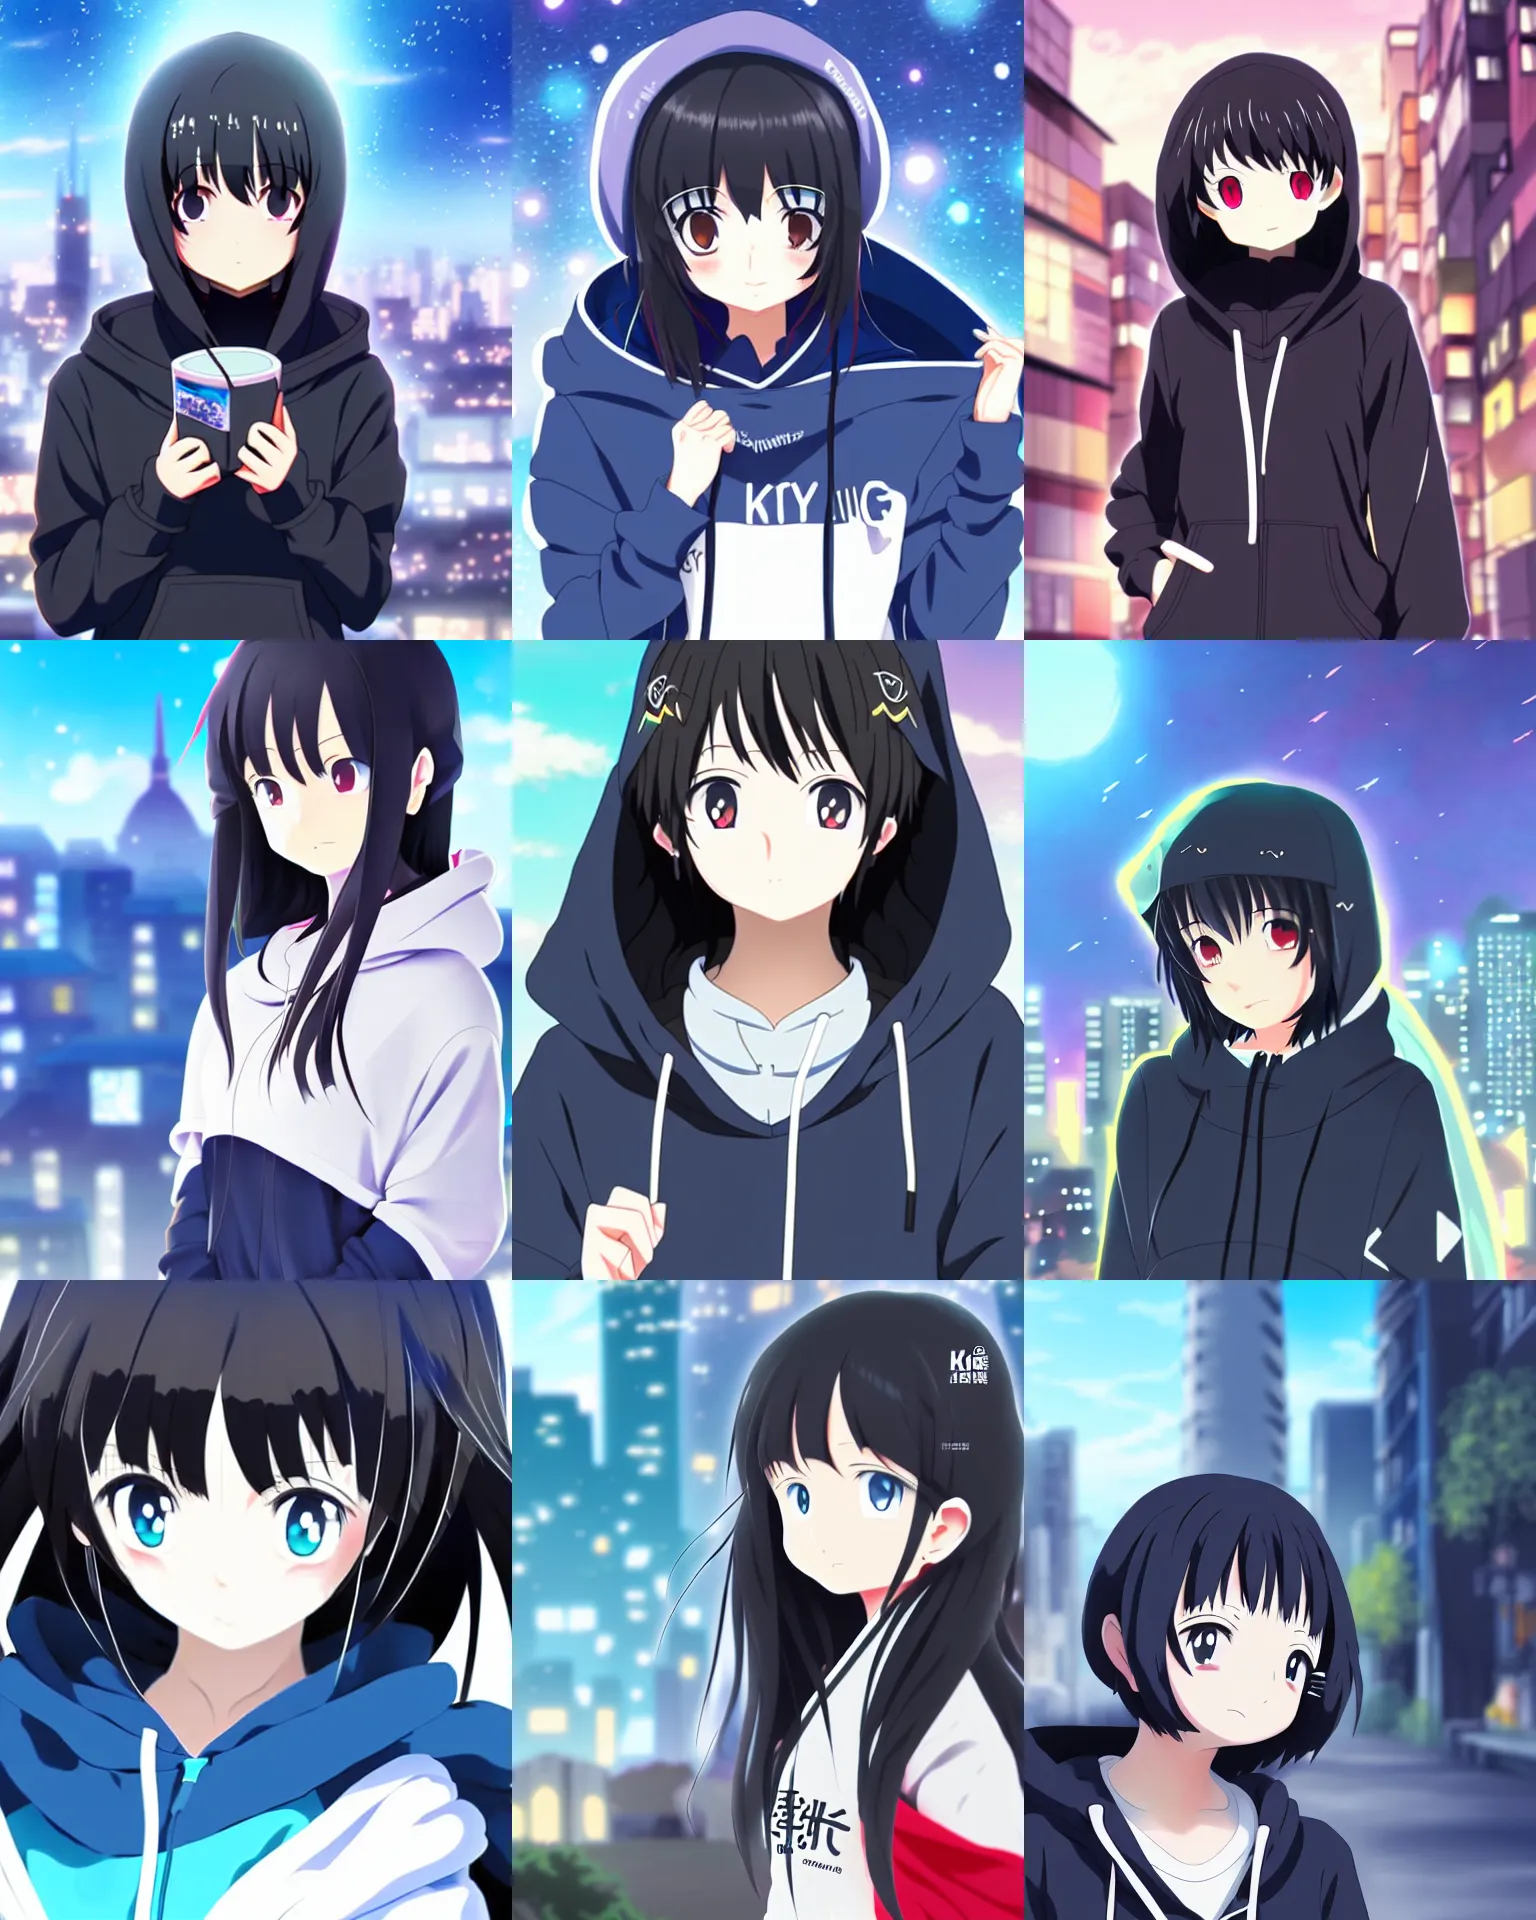 Prompt: black haired girl wearing hoodie, city, anime fantasy artwork, kyoto animation, key visual